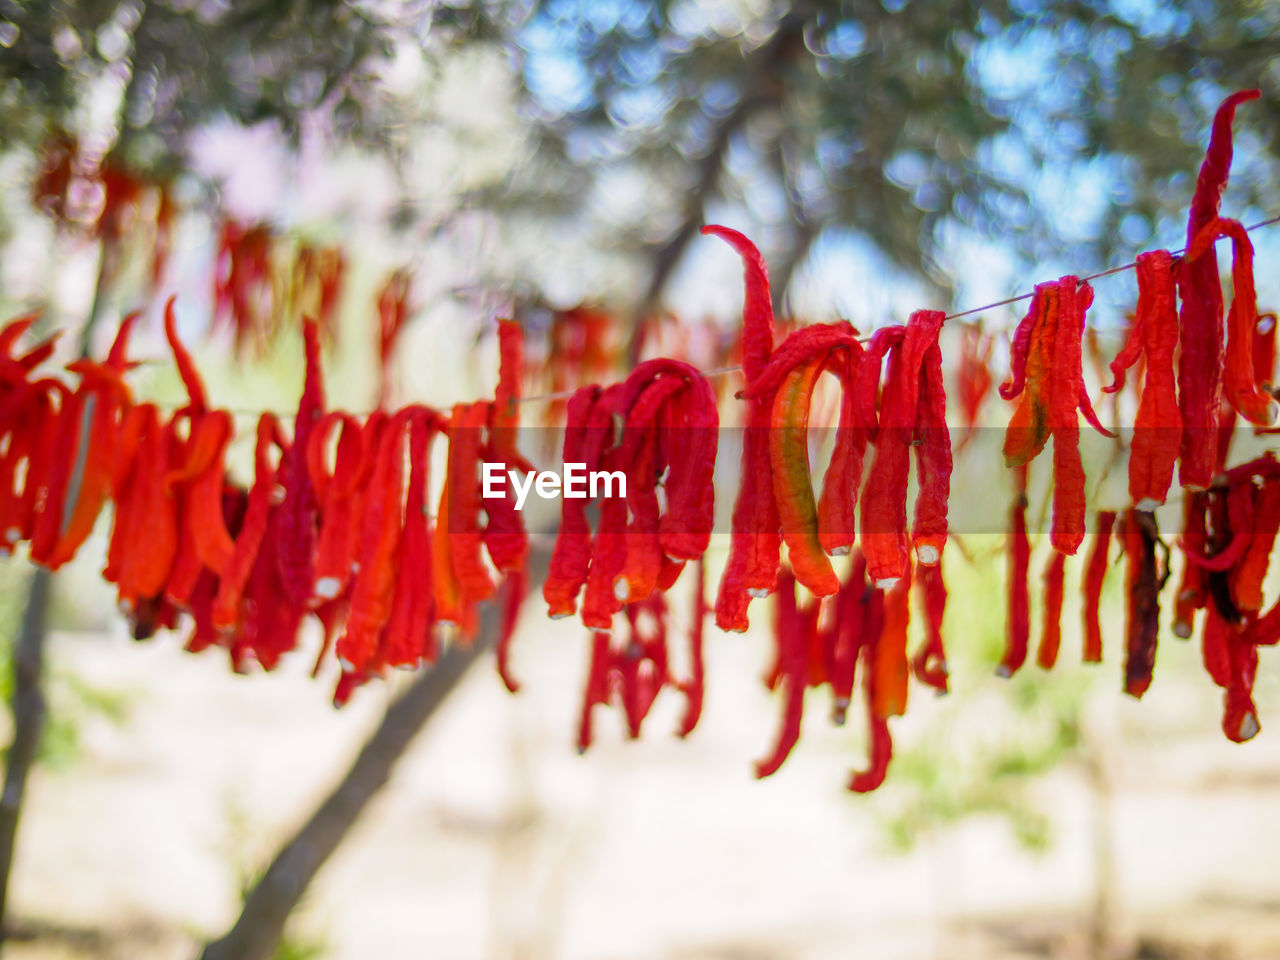 CLOSE-UP OF RED CHILI PEPPERS HANGING ON TREE